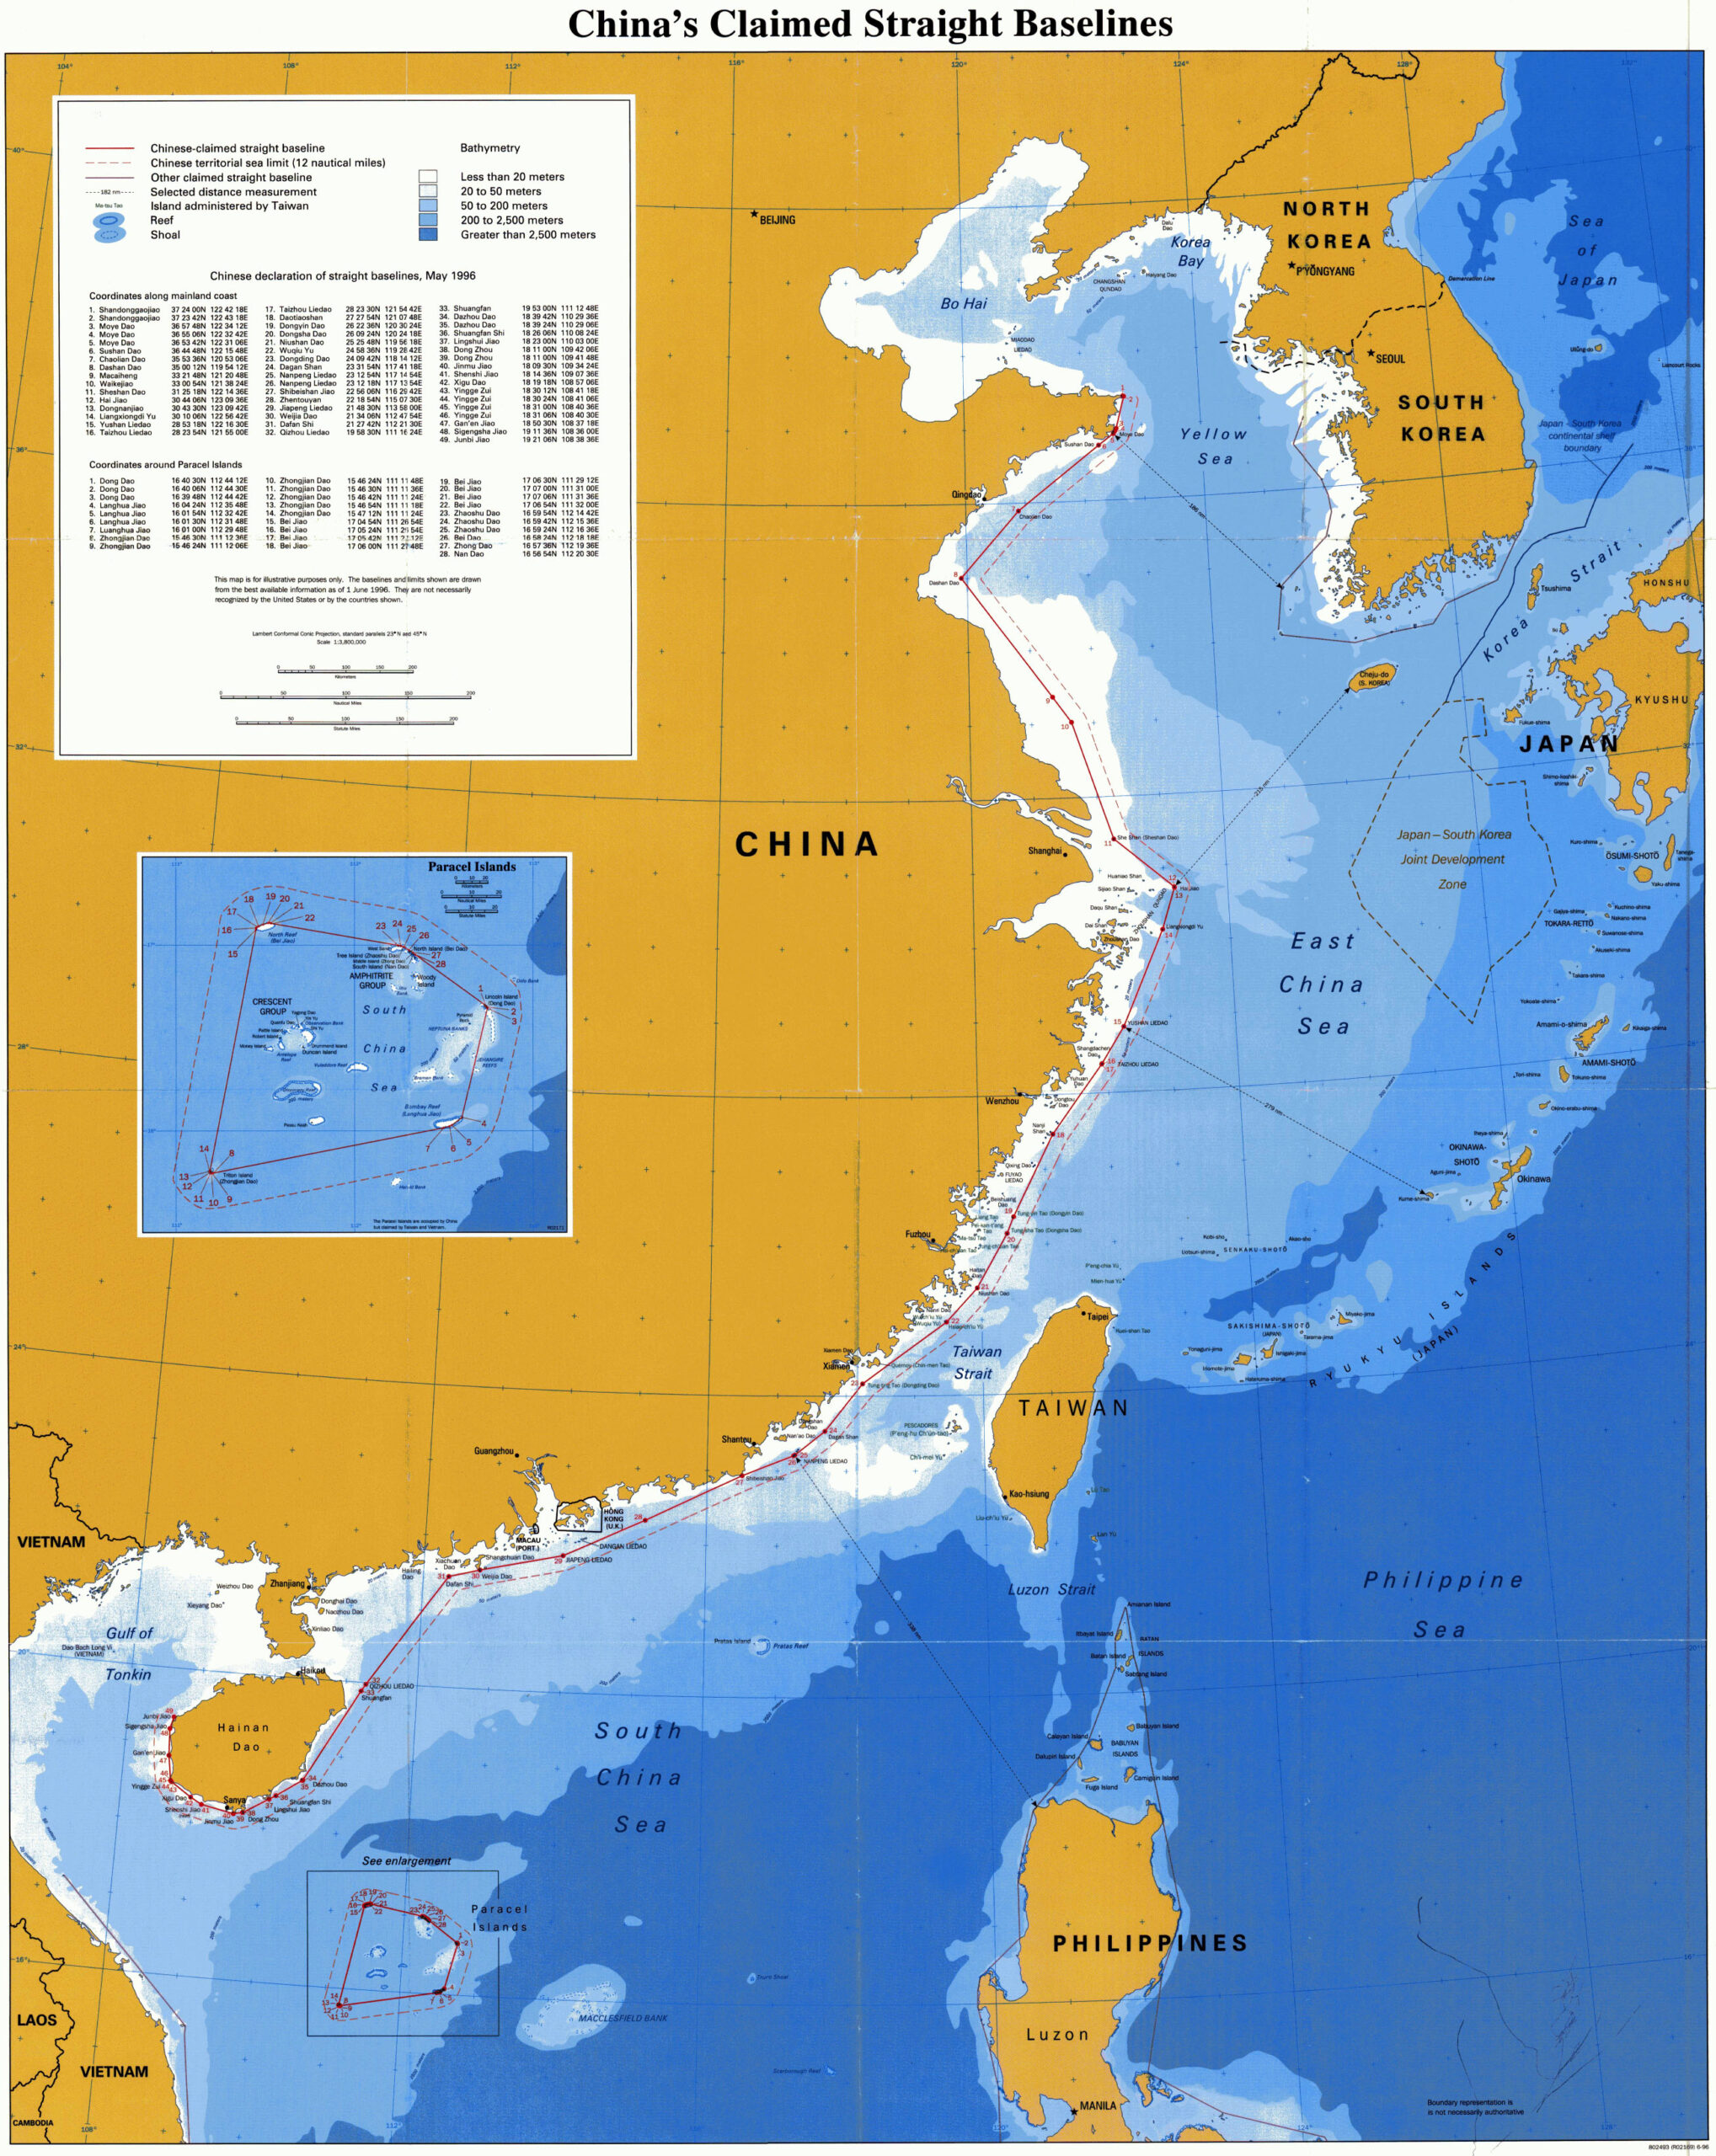 Baselines of the Territorial Sea of the People’s Republic of China that claimed in 1996